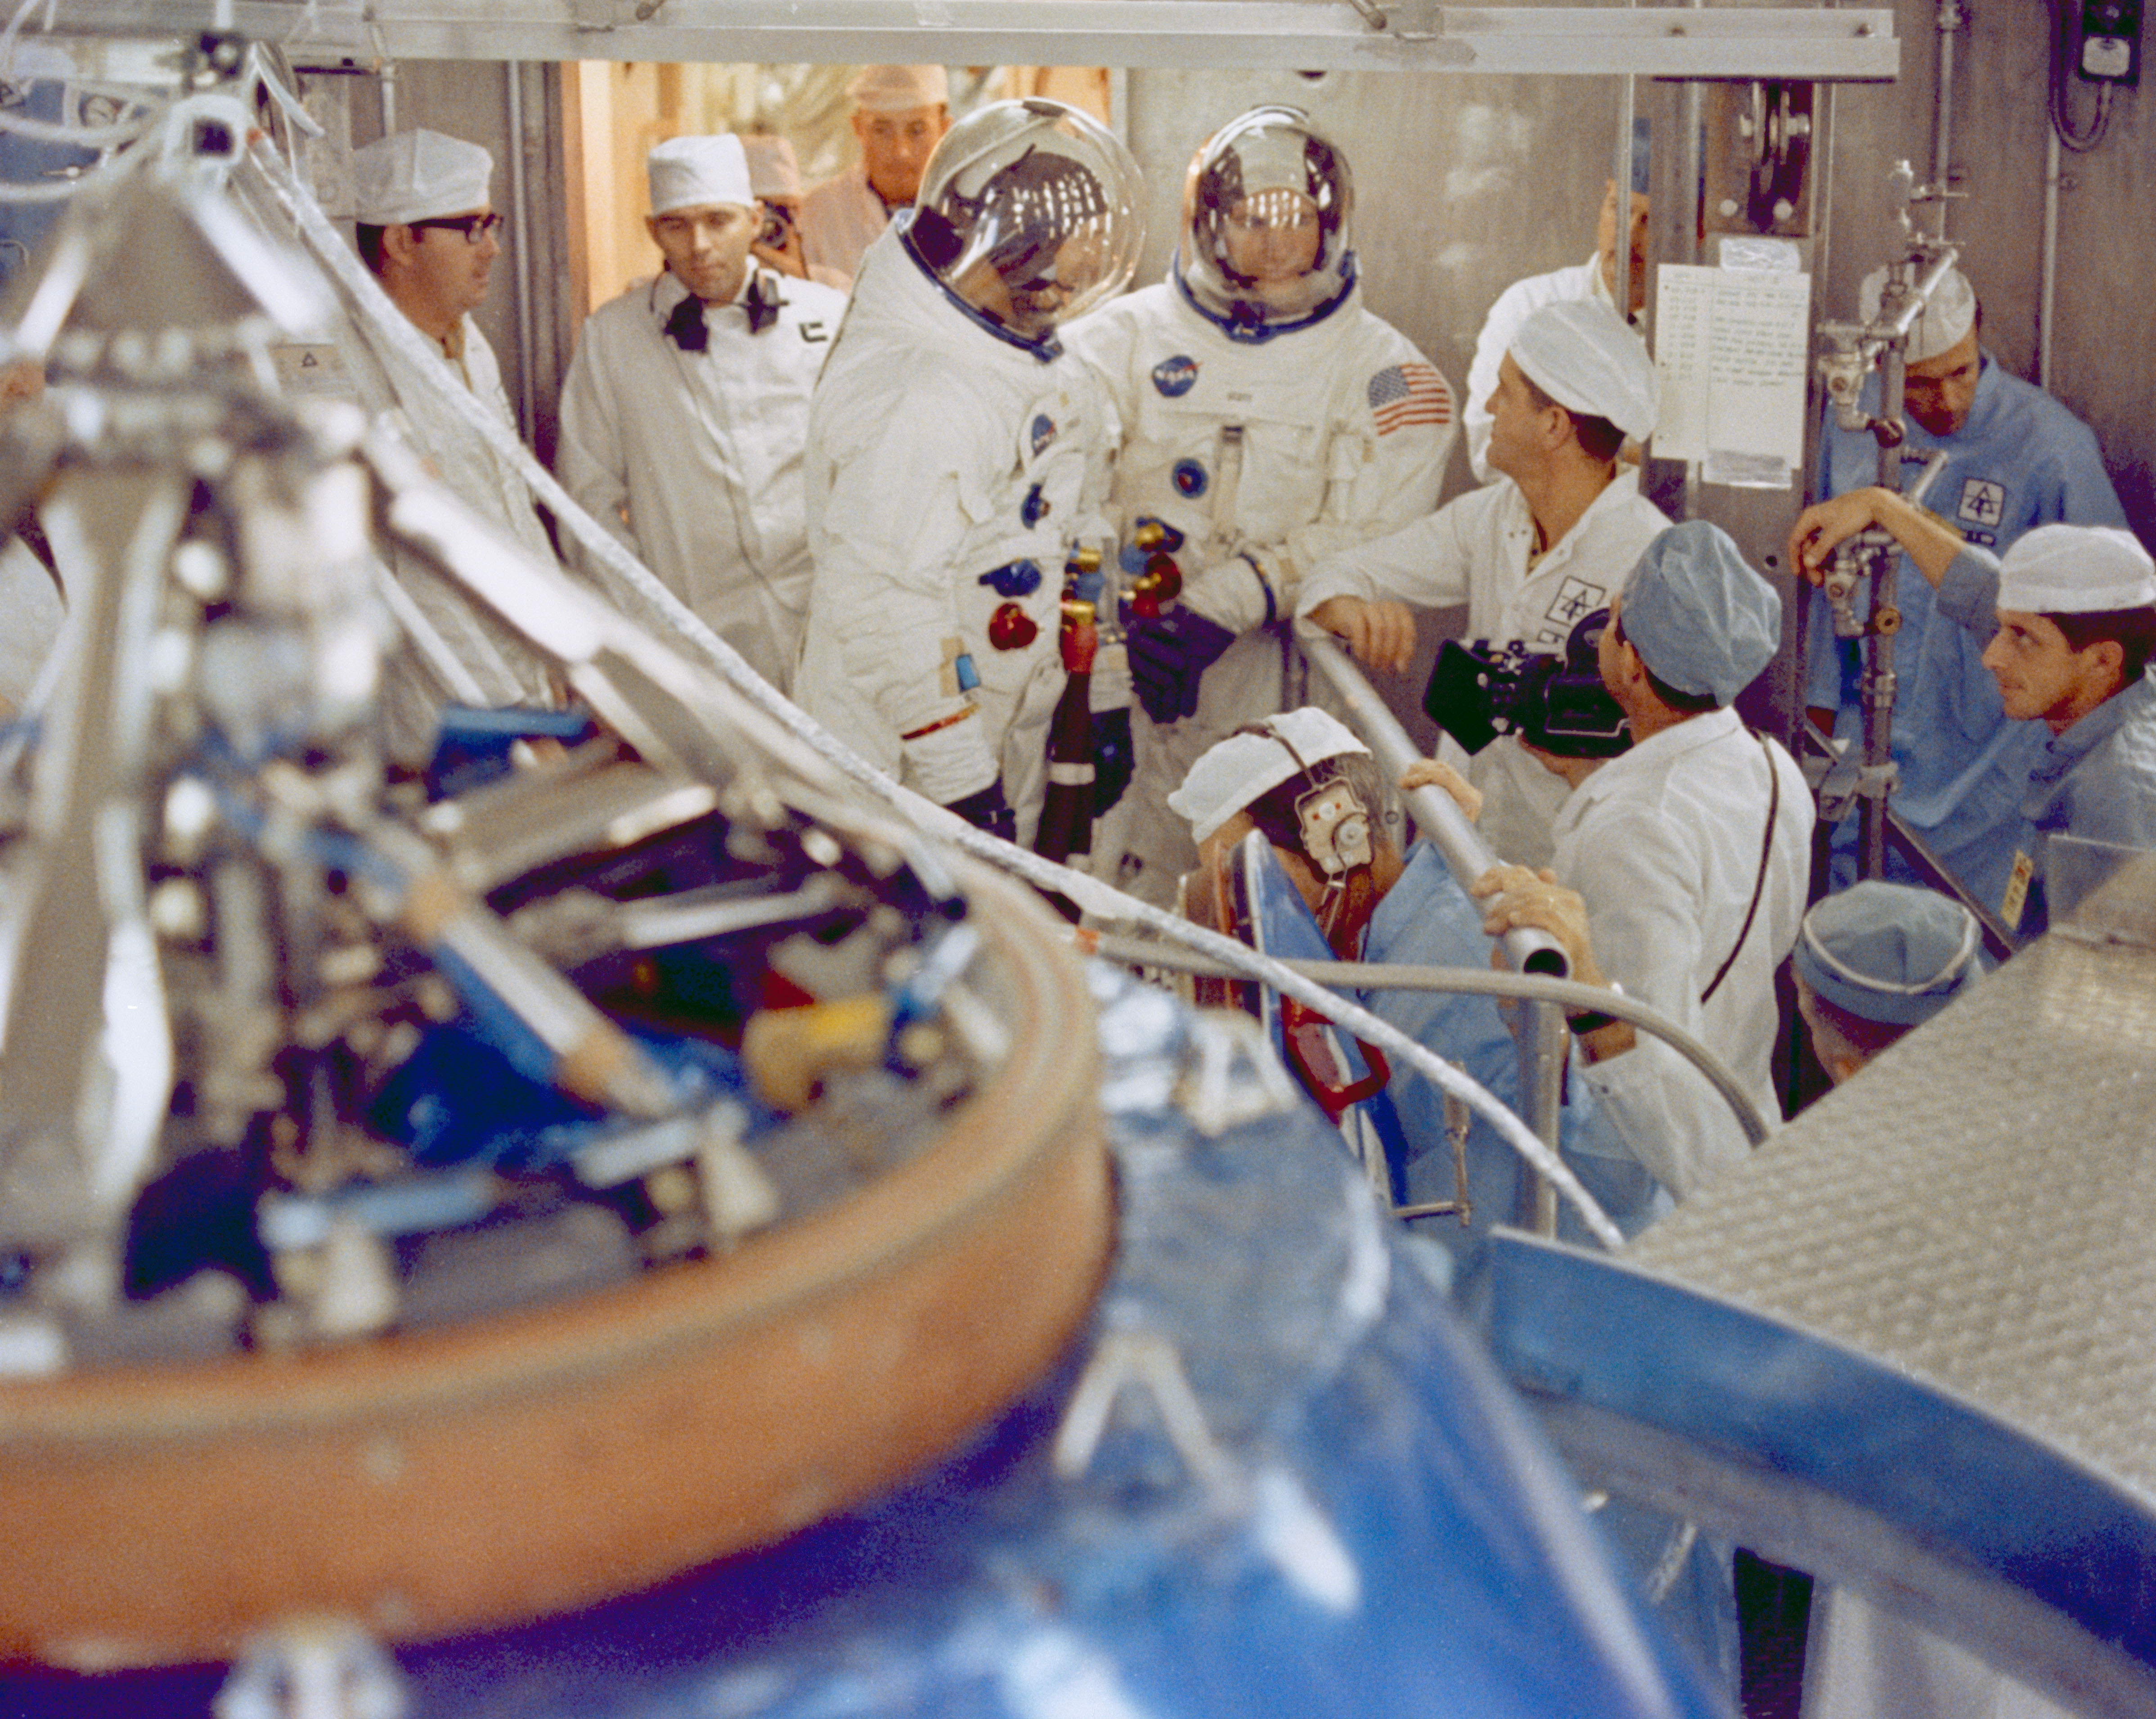 Apollo 9 prime crew McDivitt (left), Scott (right), and Schweickart (not pictured) prepare for an altitude chamber test in the CM